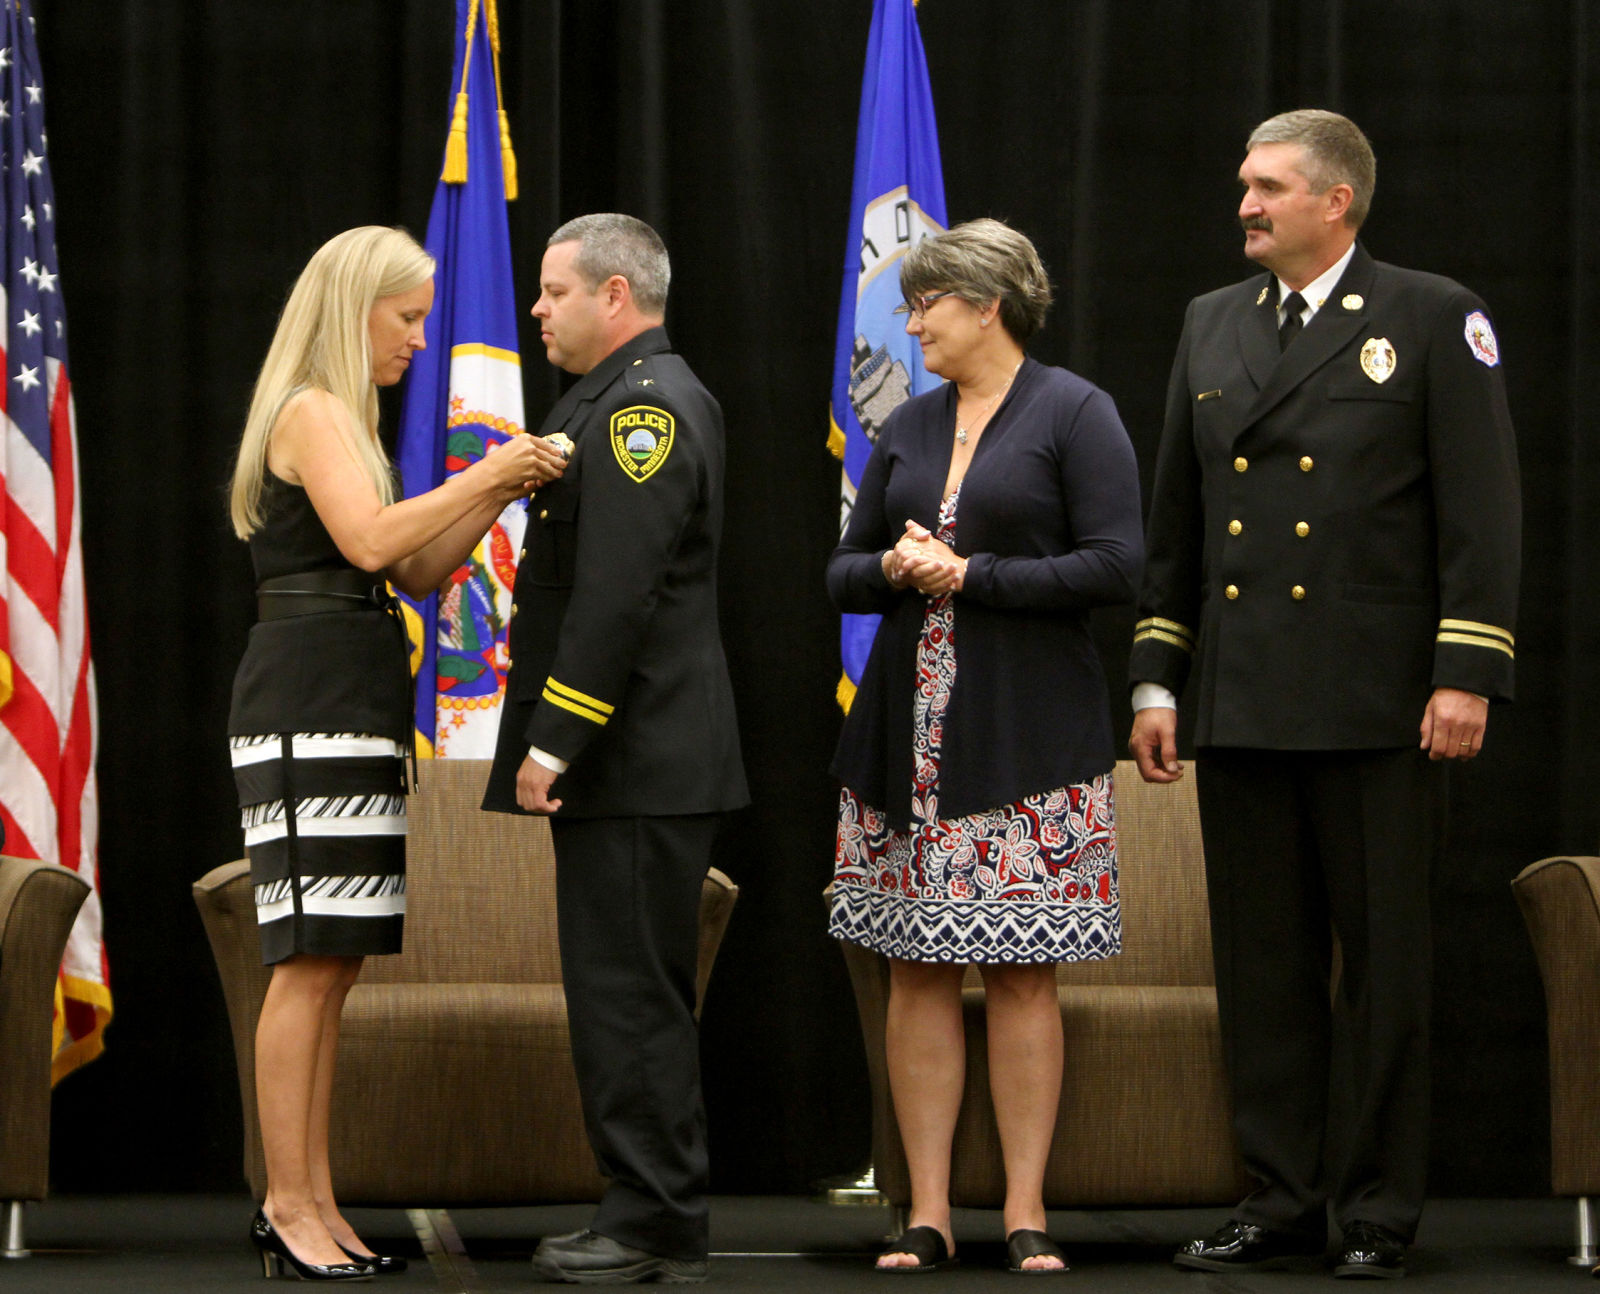 James Franklin was sworn in as police chief of Rochester on July 26.